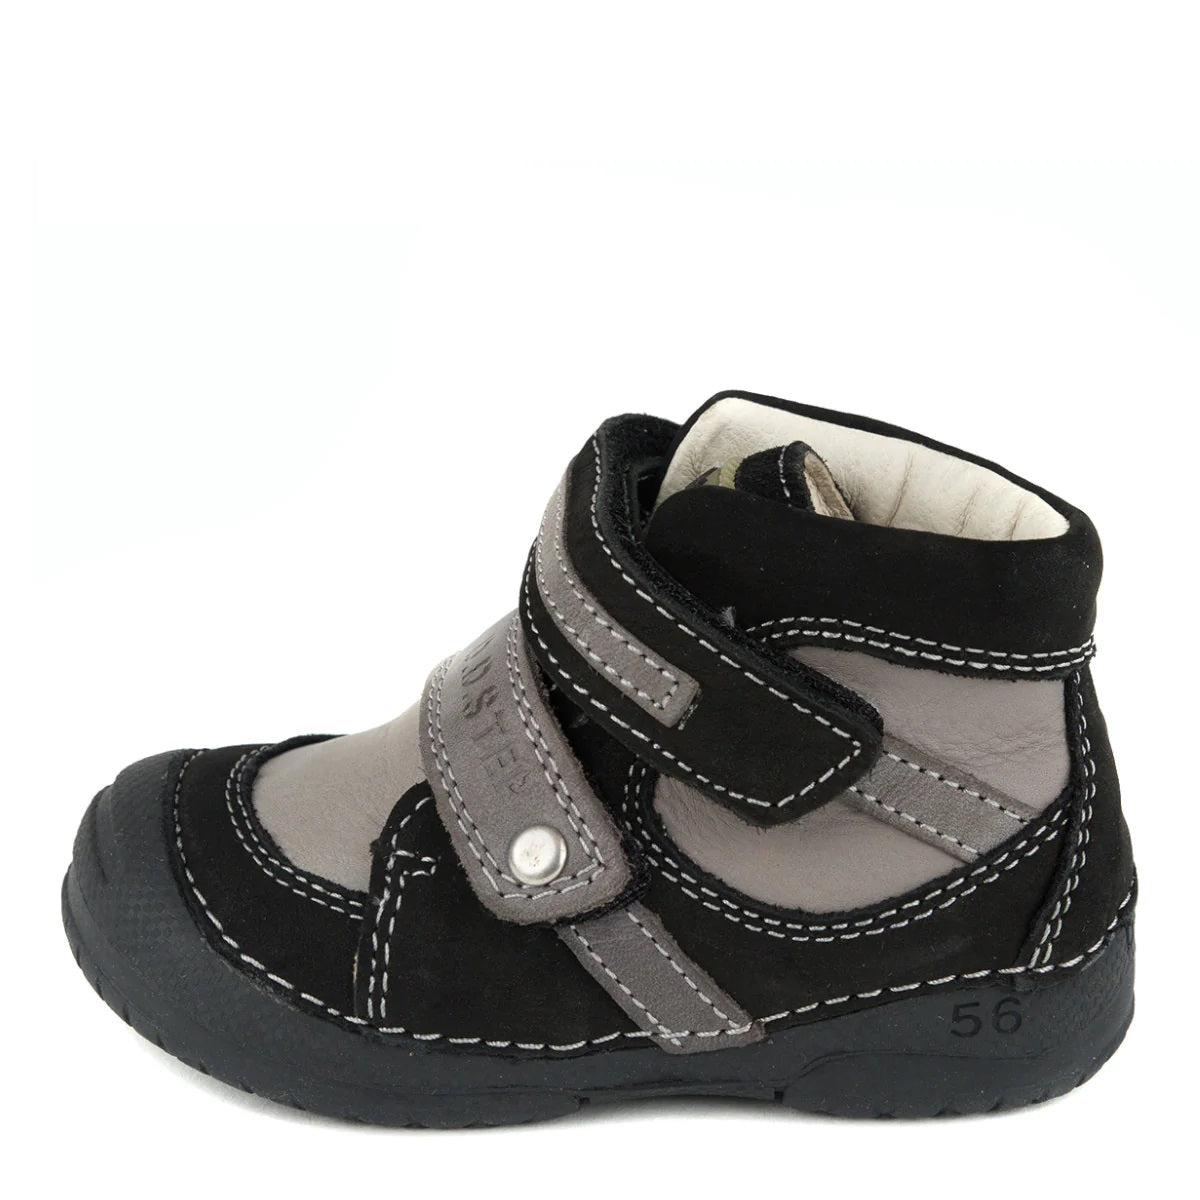 D.D. Step Toddler Boy Boots Grey And Black - Supportive Leather Shoes From Europe Kids Orthopedic - shoekid.ca